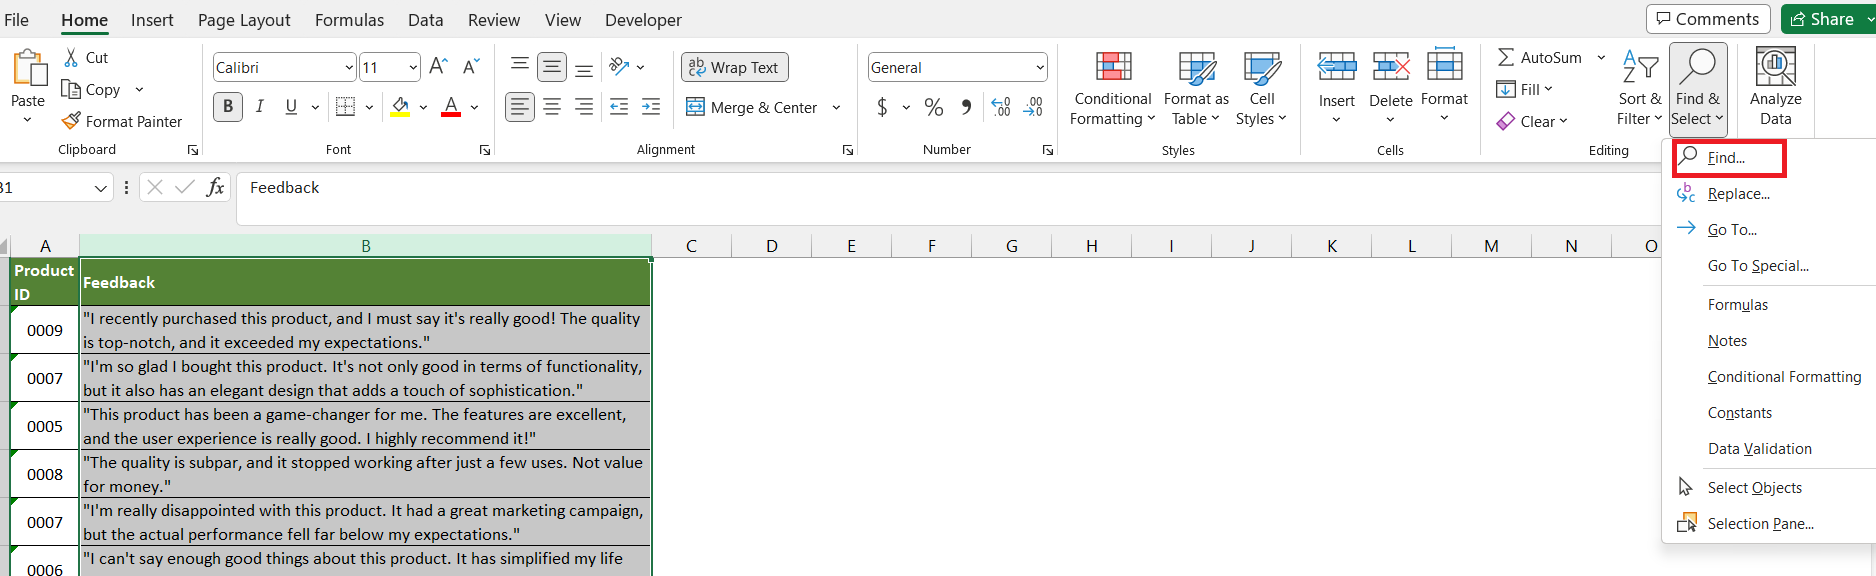 Top 3 Methods to Locate Cell that Contains Specific Text in Excel | MyExcelOnline